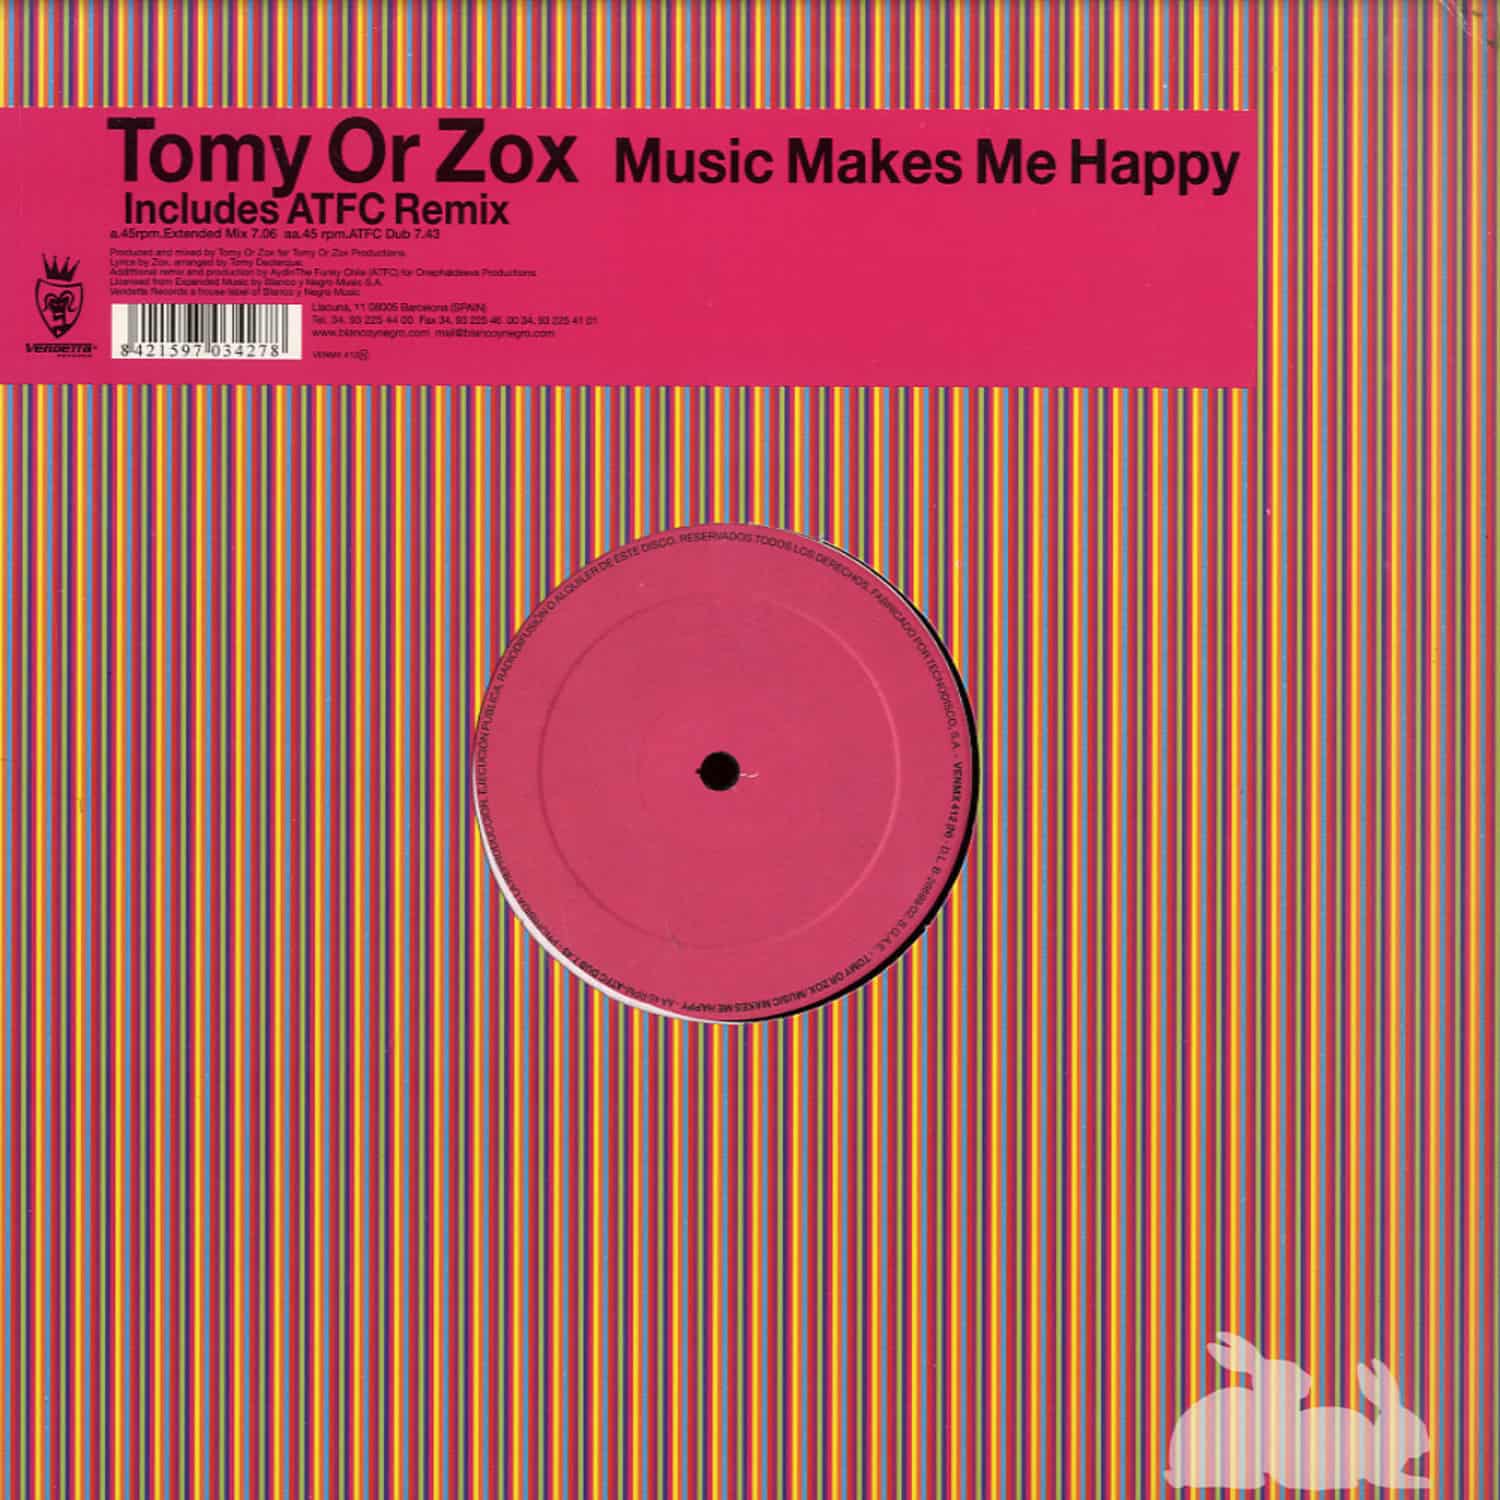 Tomy Or Zox - MUSIC MAKES ME HAPPY